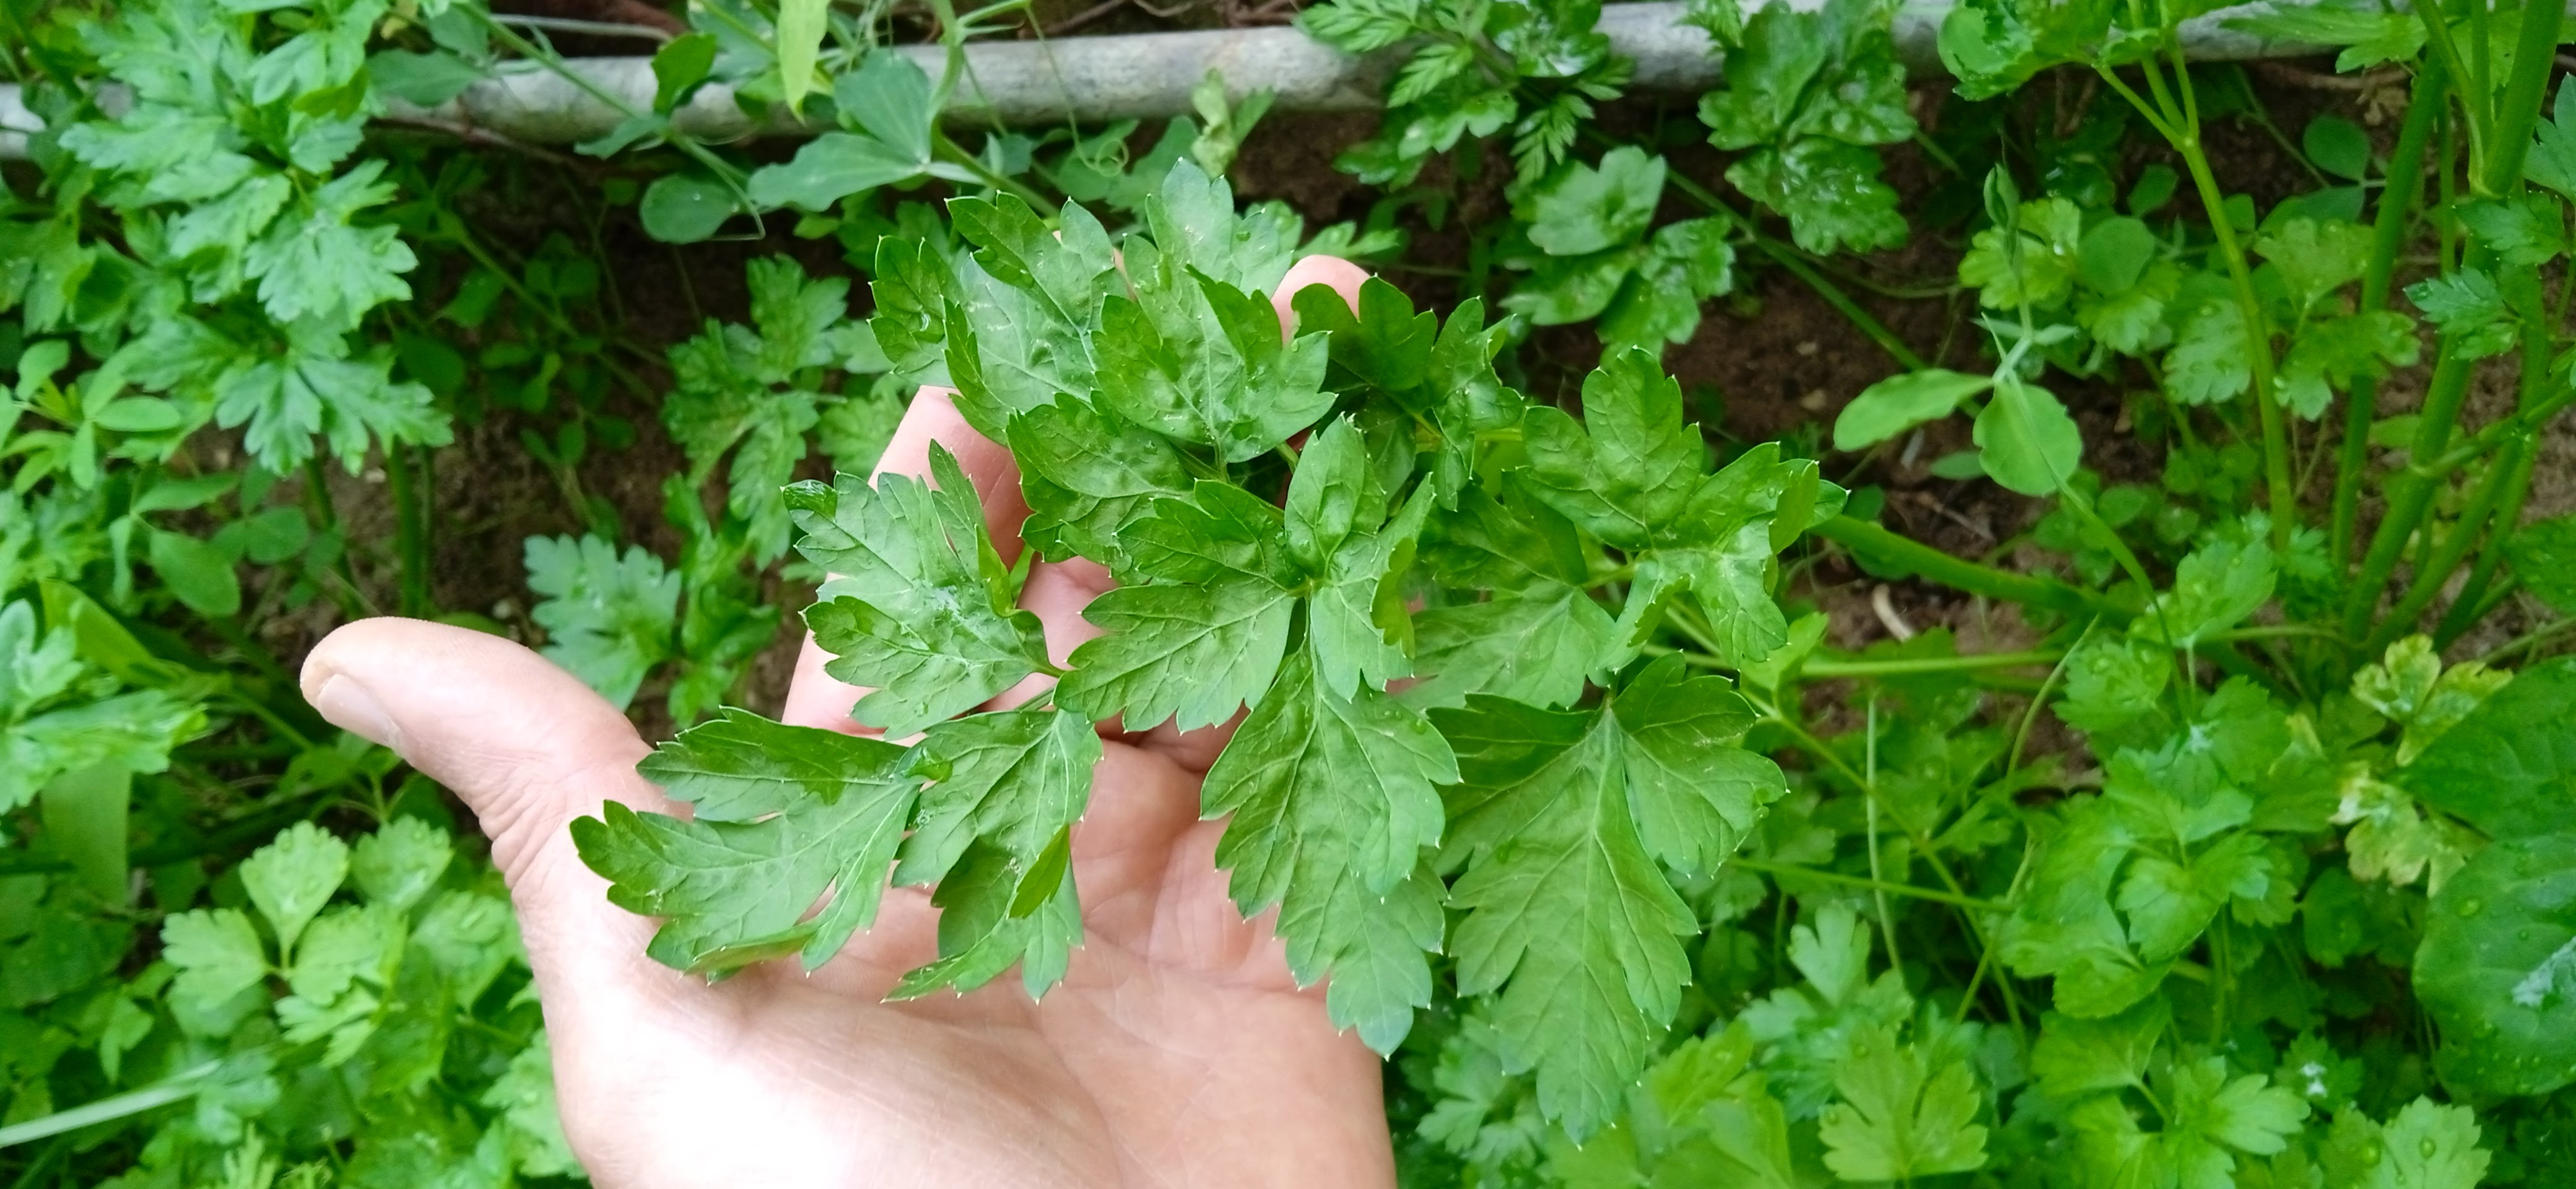 Growing parsley in containers is a good option if you don't have garden space for it. To have good success, choose a sunny spot in your herb garden and make sure the soil in the container is well-drained and rich in organic matter.